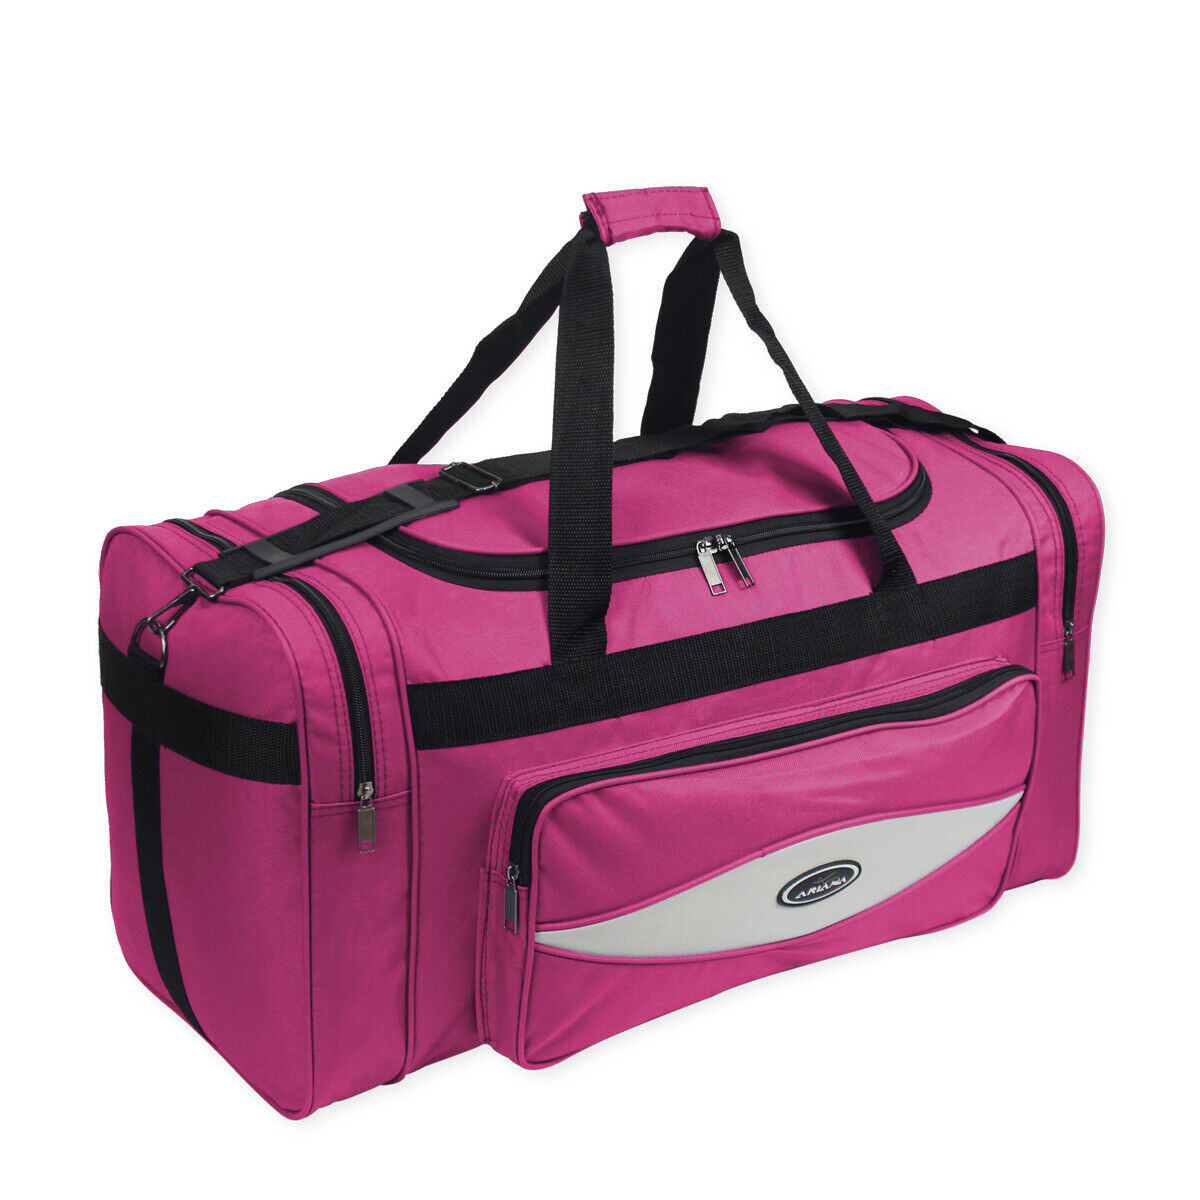 Colourful High Quality Lightweight Holdall Duffle Cargo Travel Cabin ...